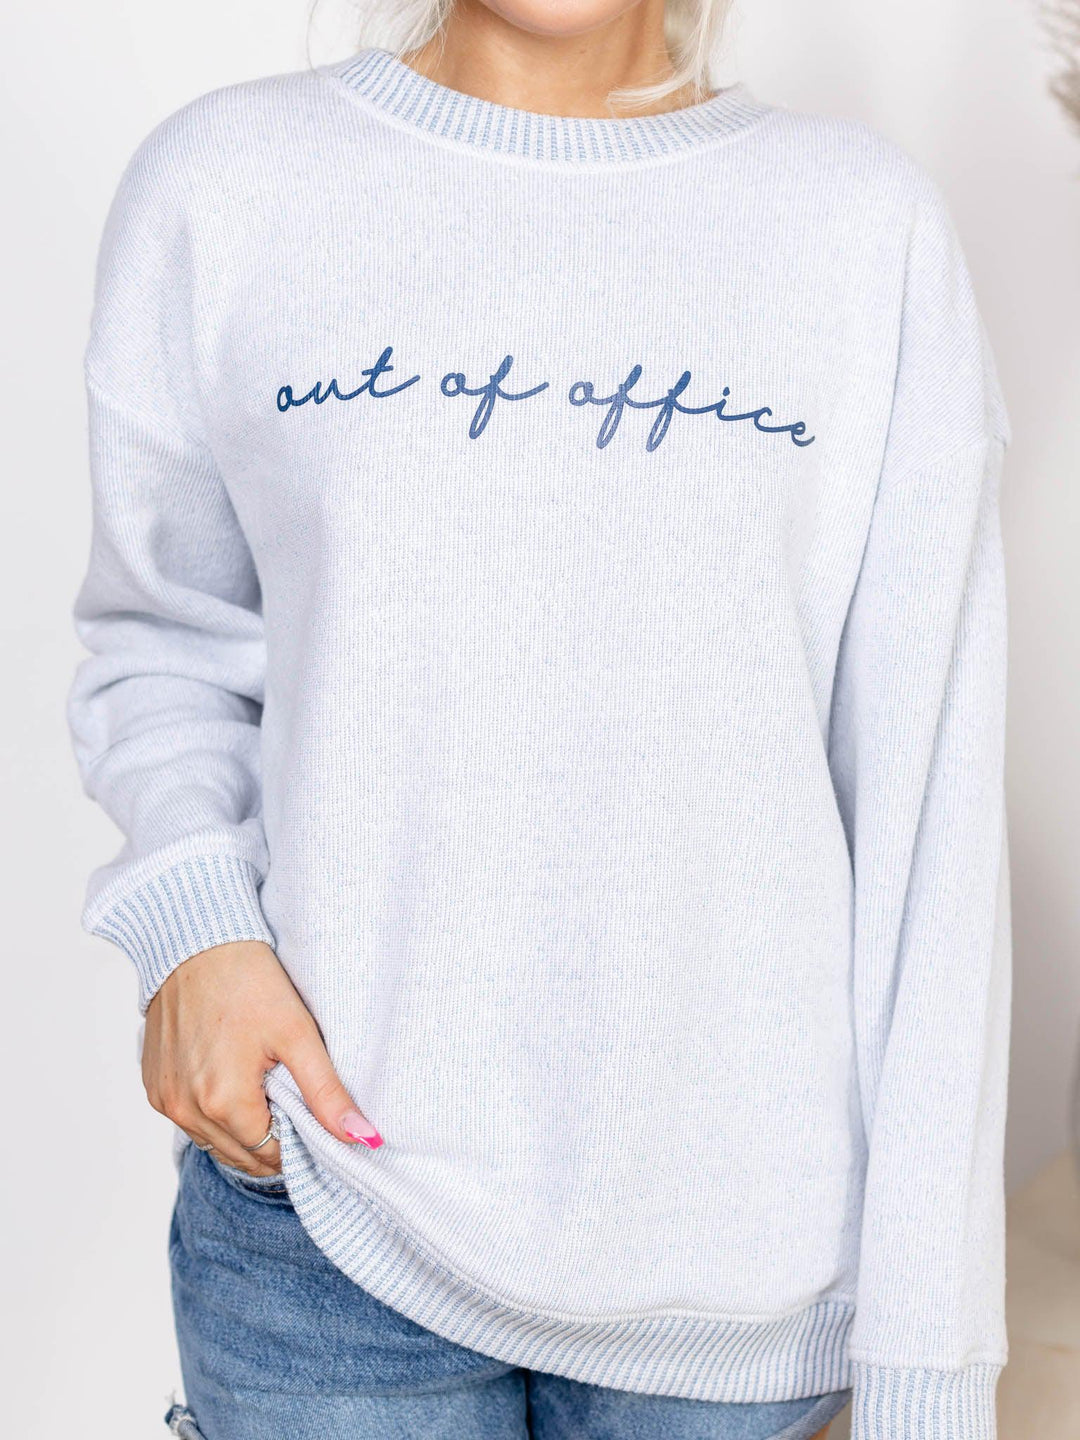 Chicka-D-Out of Office Sweater Fleece Crew - Leela and Lavender